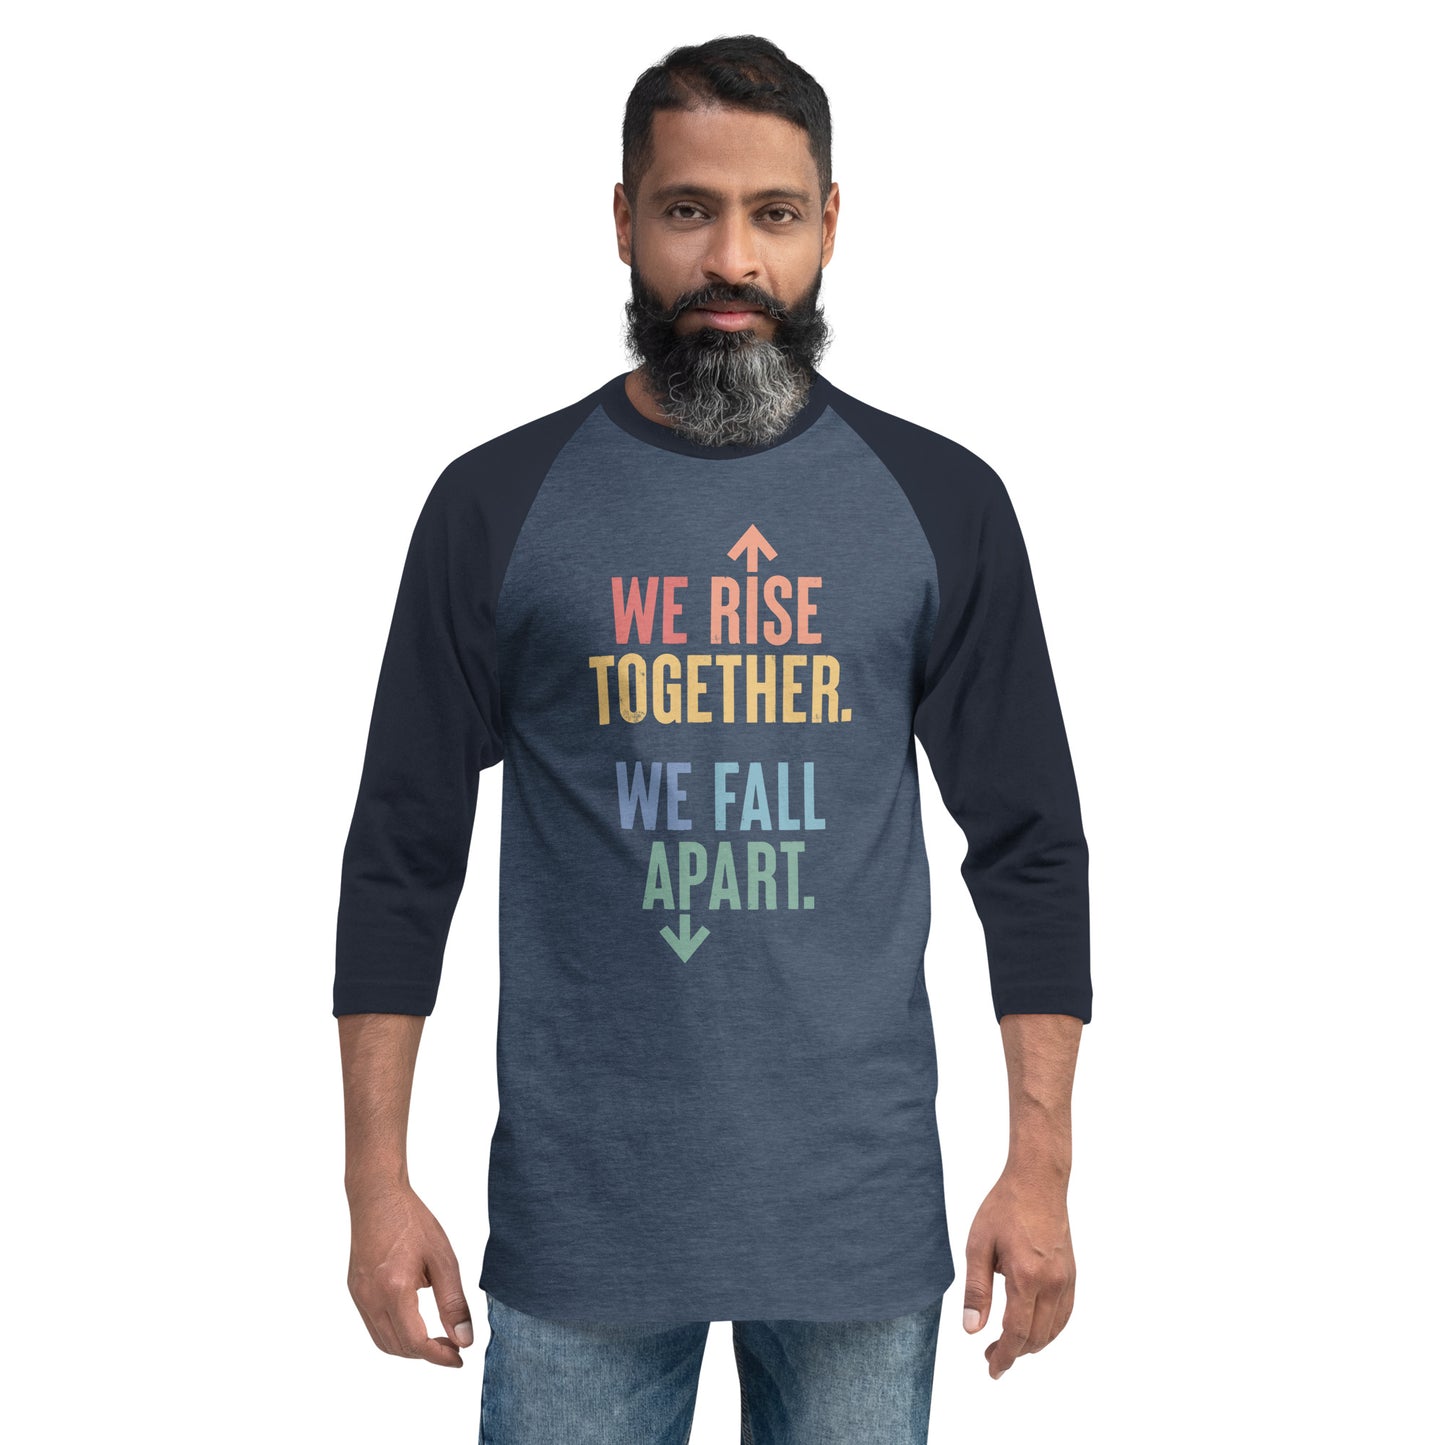 We Rise Together - 3/4 Sleeve Shirt